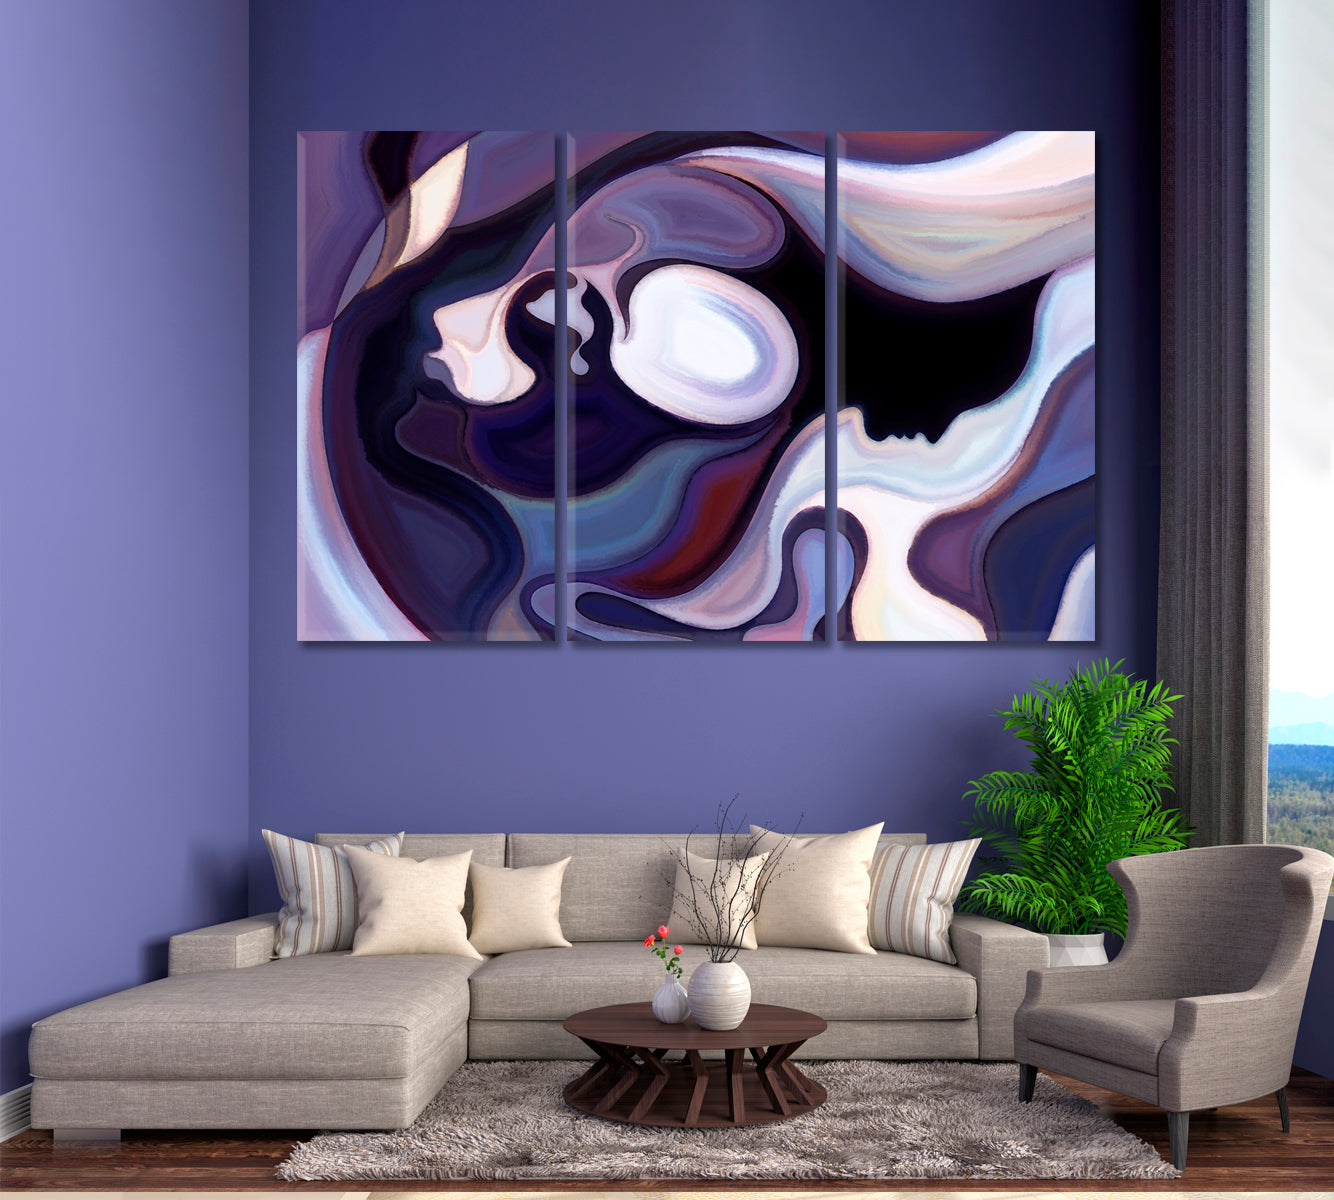 People And Refined Lines In Blue Lilac Purple Colors Abstract Art Print Artesty 3 panels 36" x 24" 